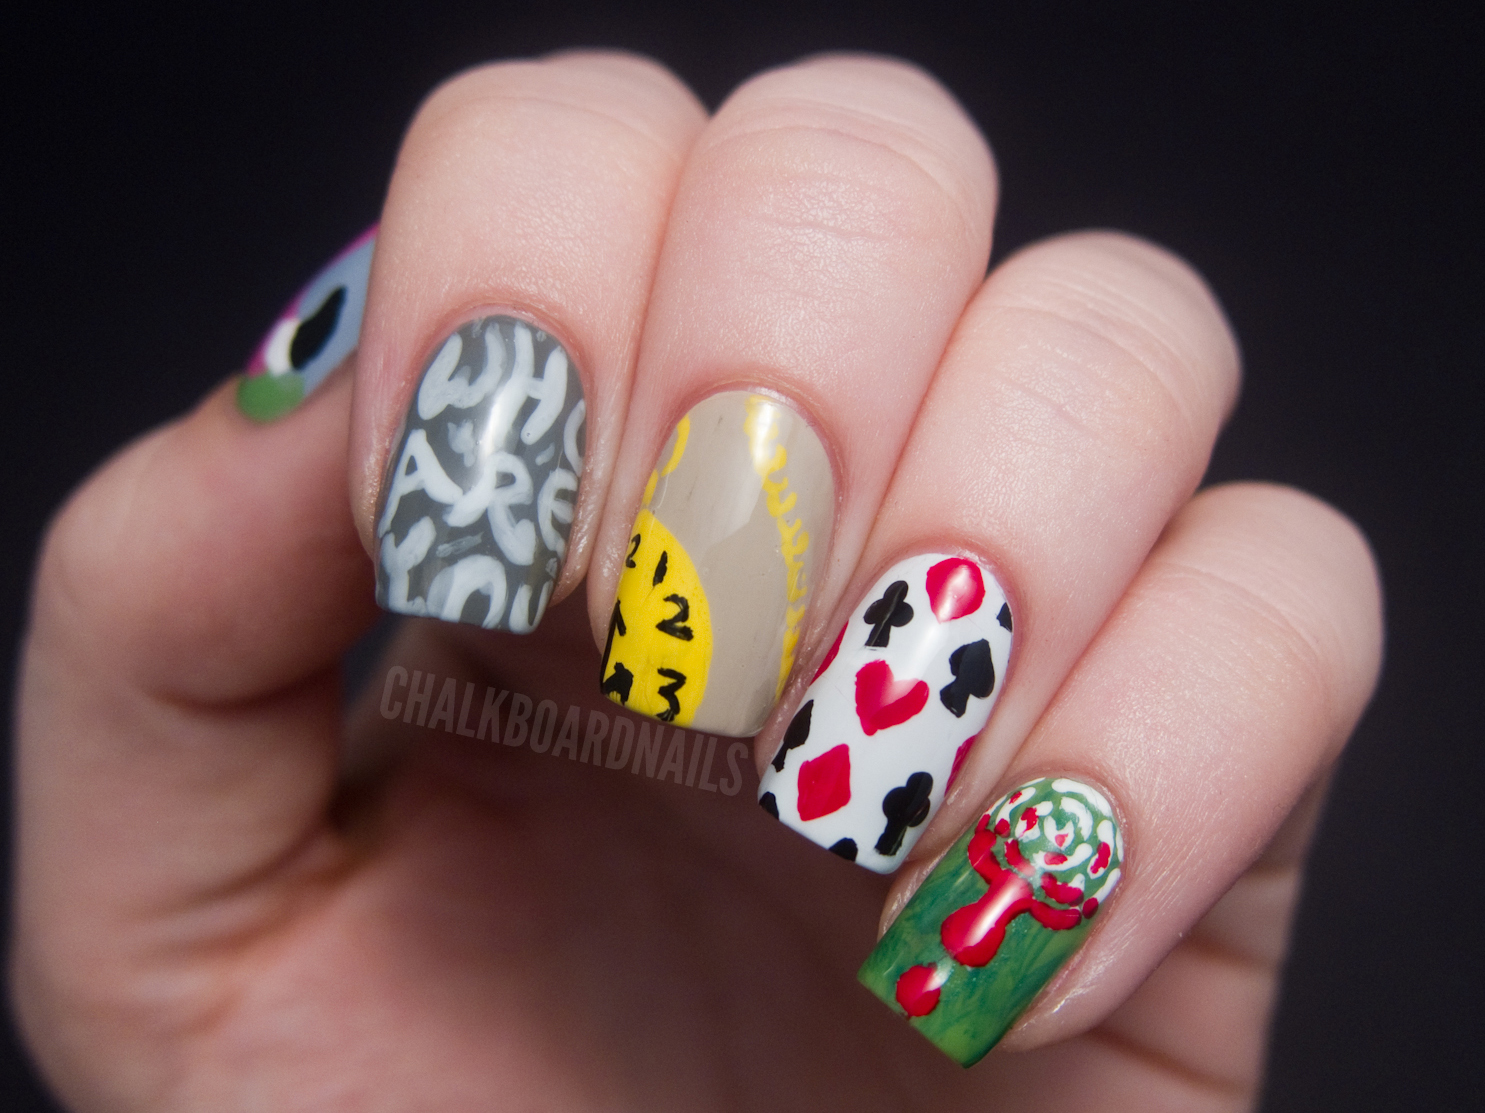 1. "Alice in Wonderland" themed nail art tutorial by cutepolish - wide 3